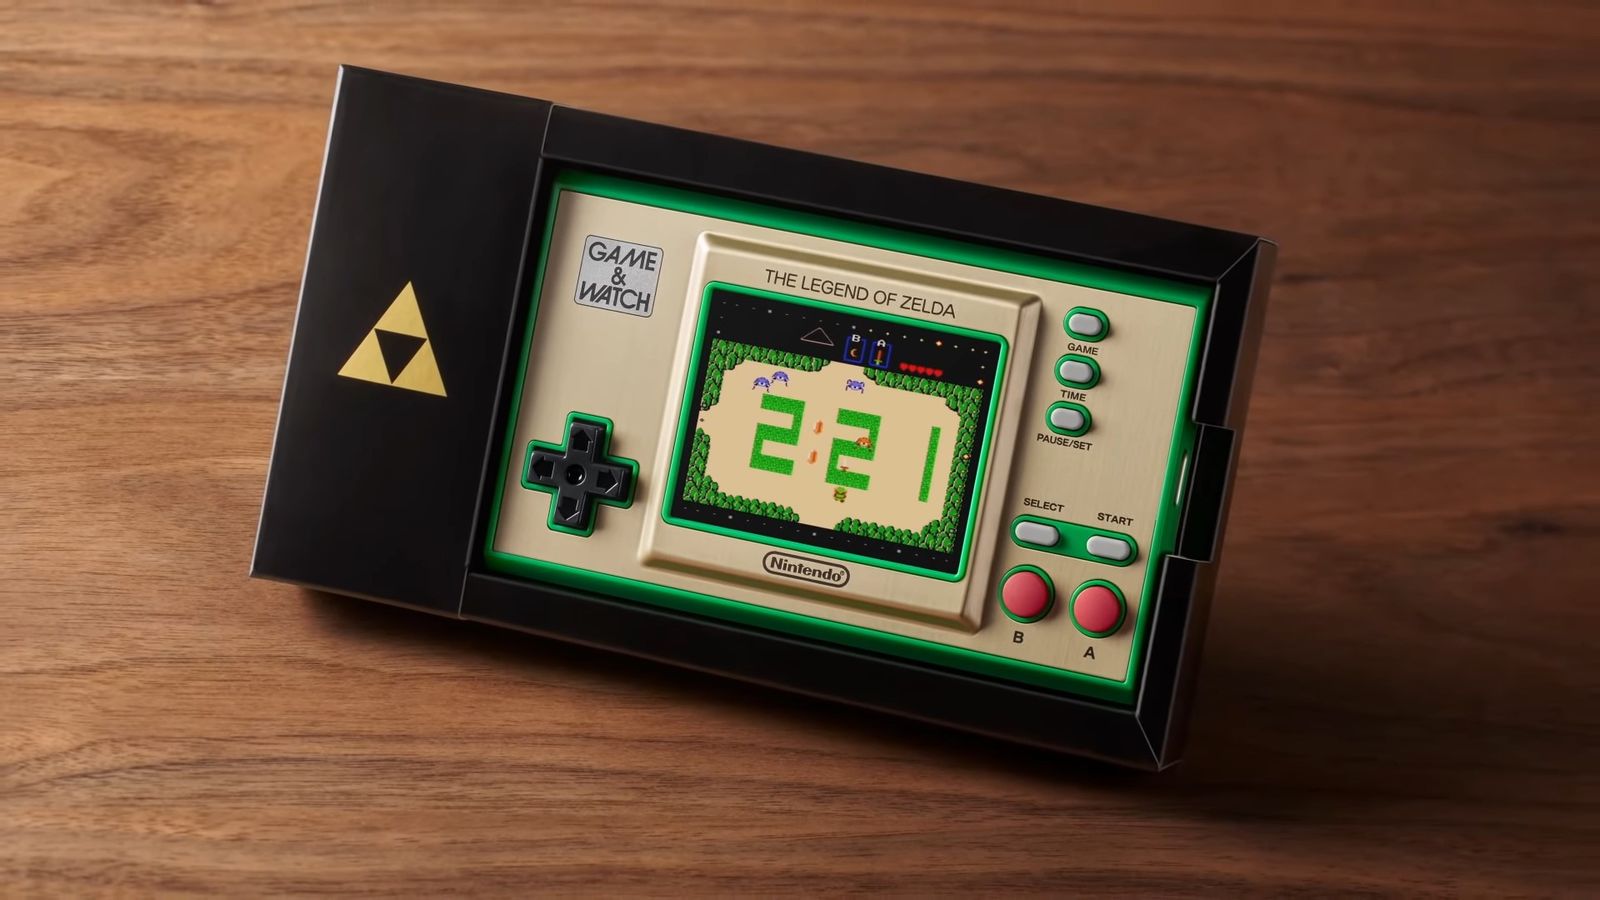 The Game & Watch: the Legend of Zelda handheld sits in its black dock, on a darkwood surface